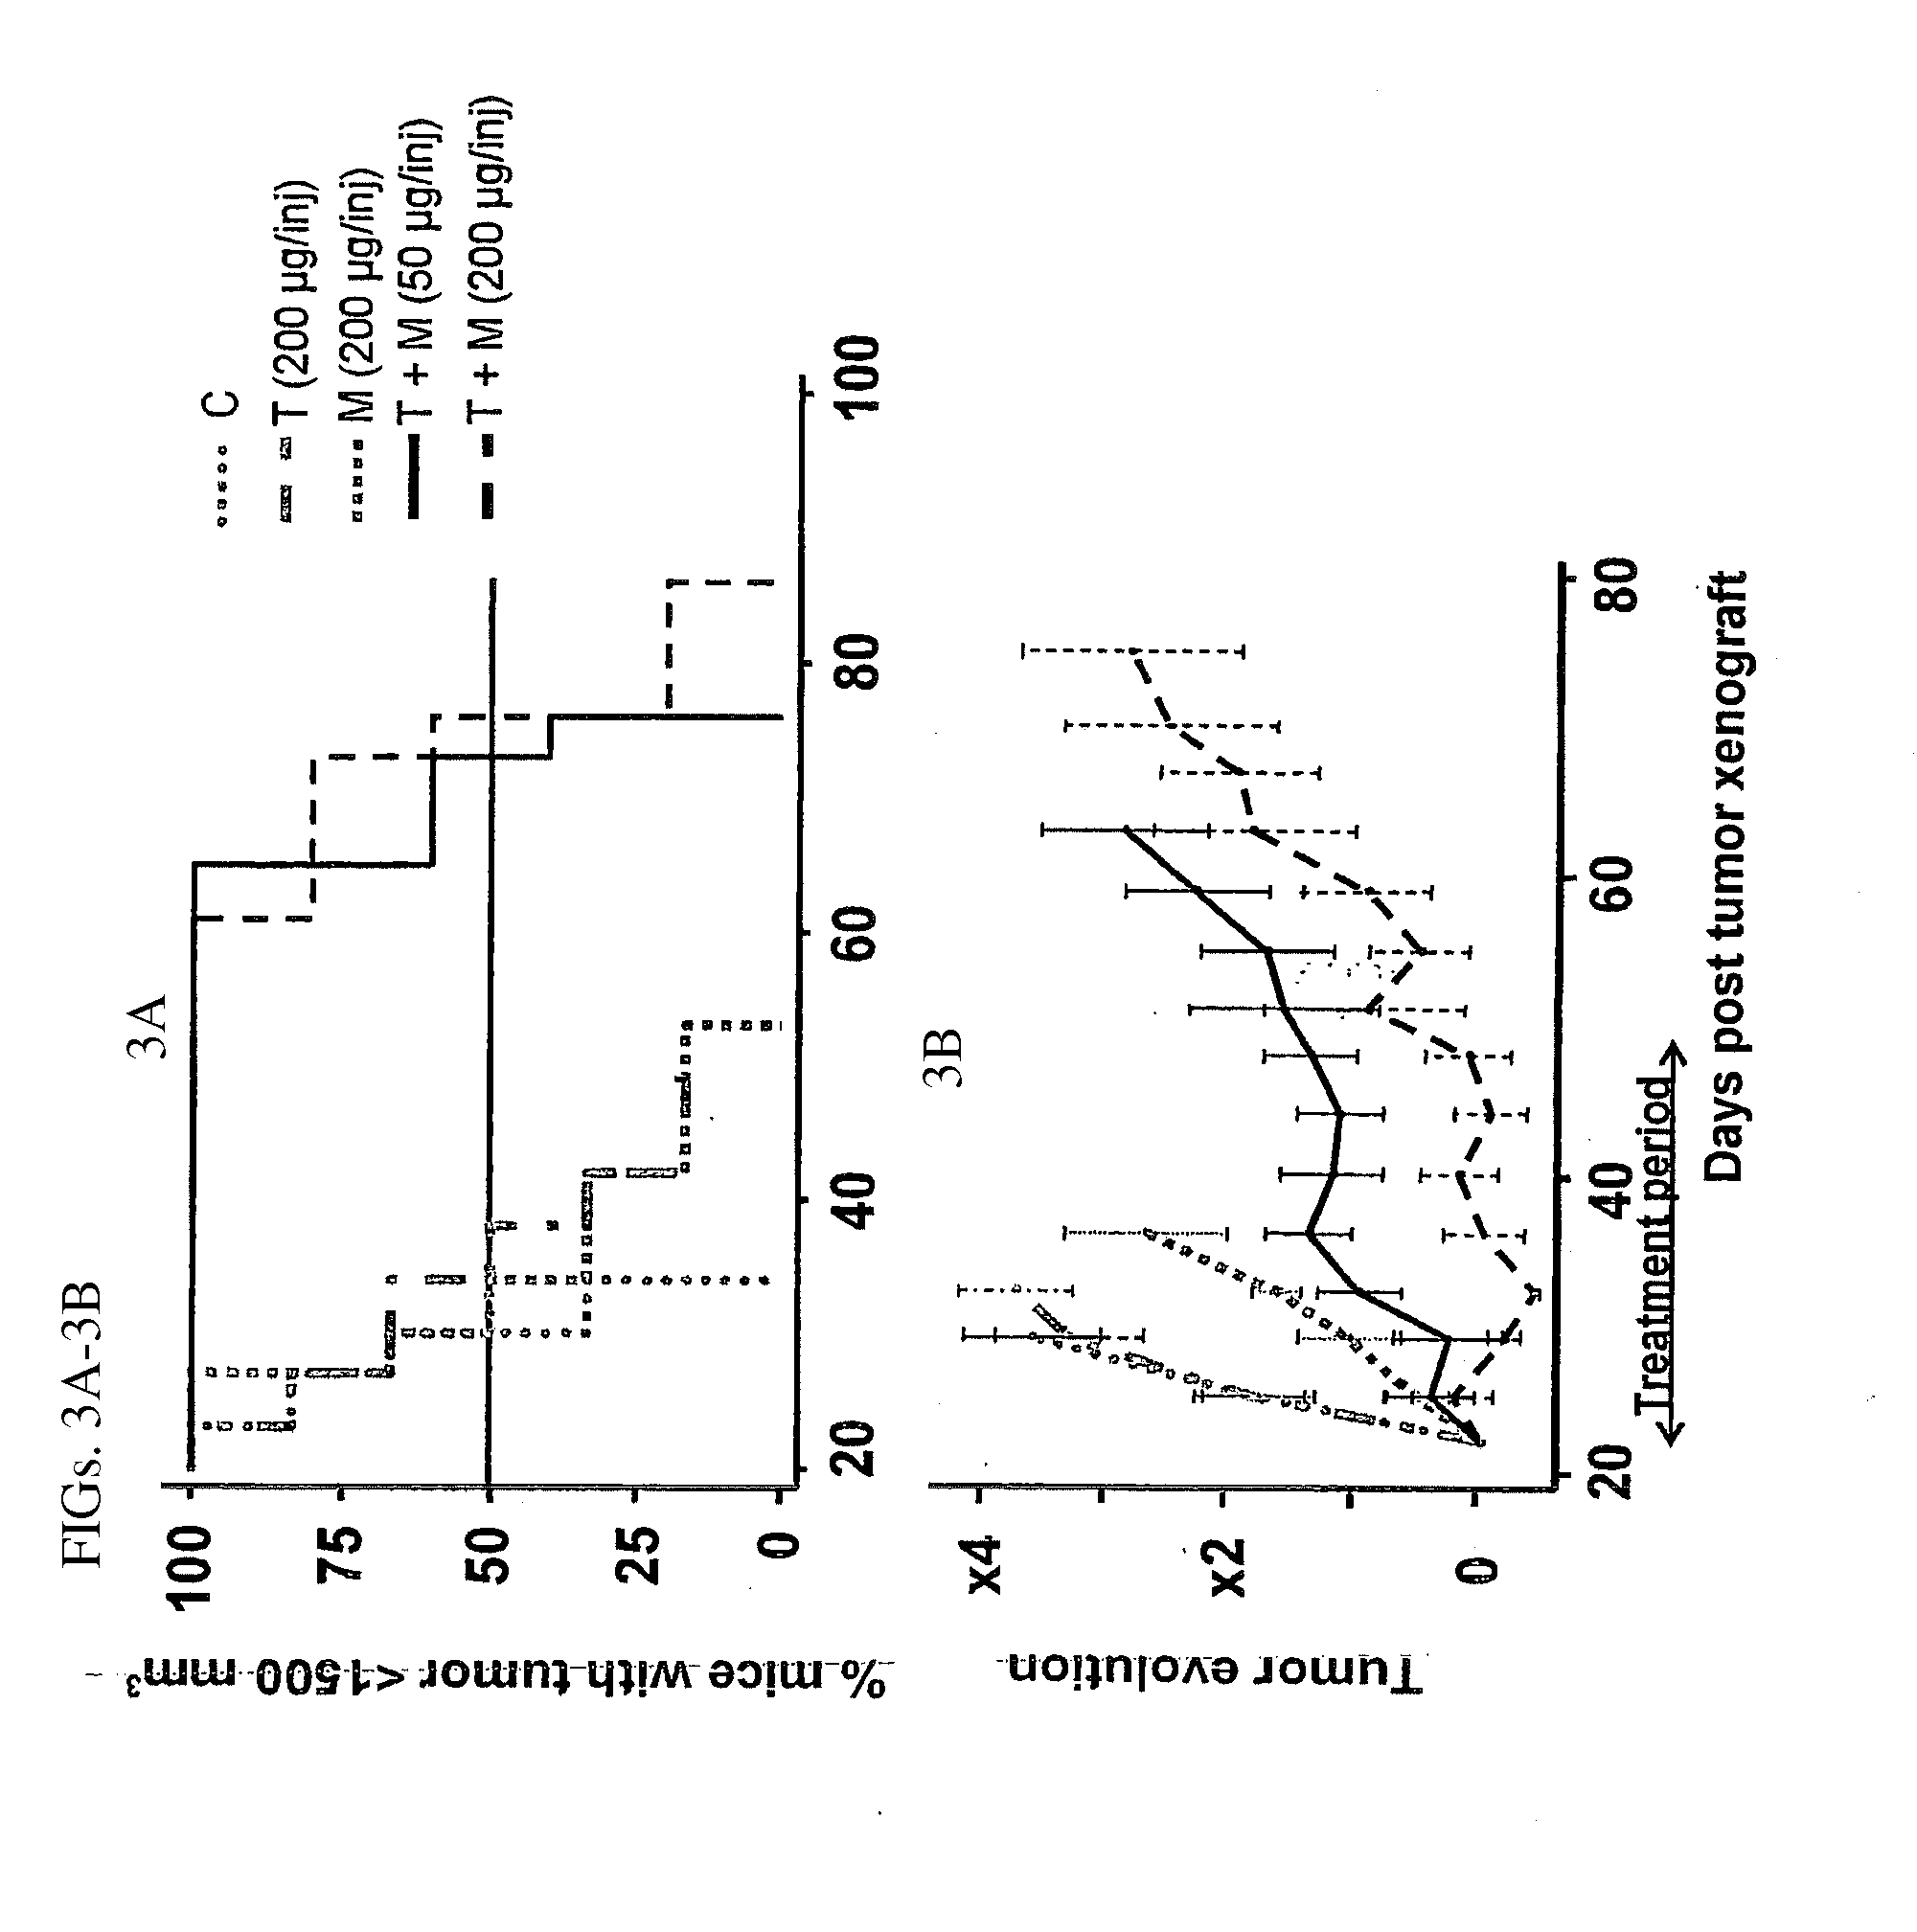 Combination Therapy Using Anti-EGFR And Anti-HER2 Antibodies